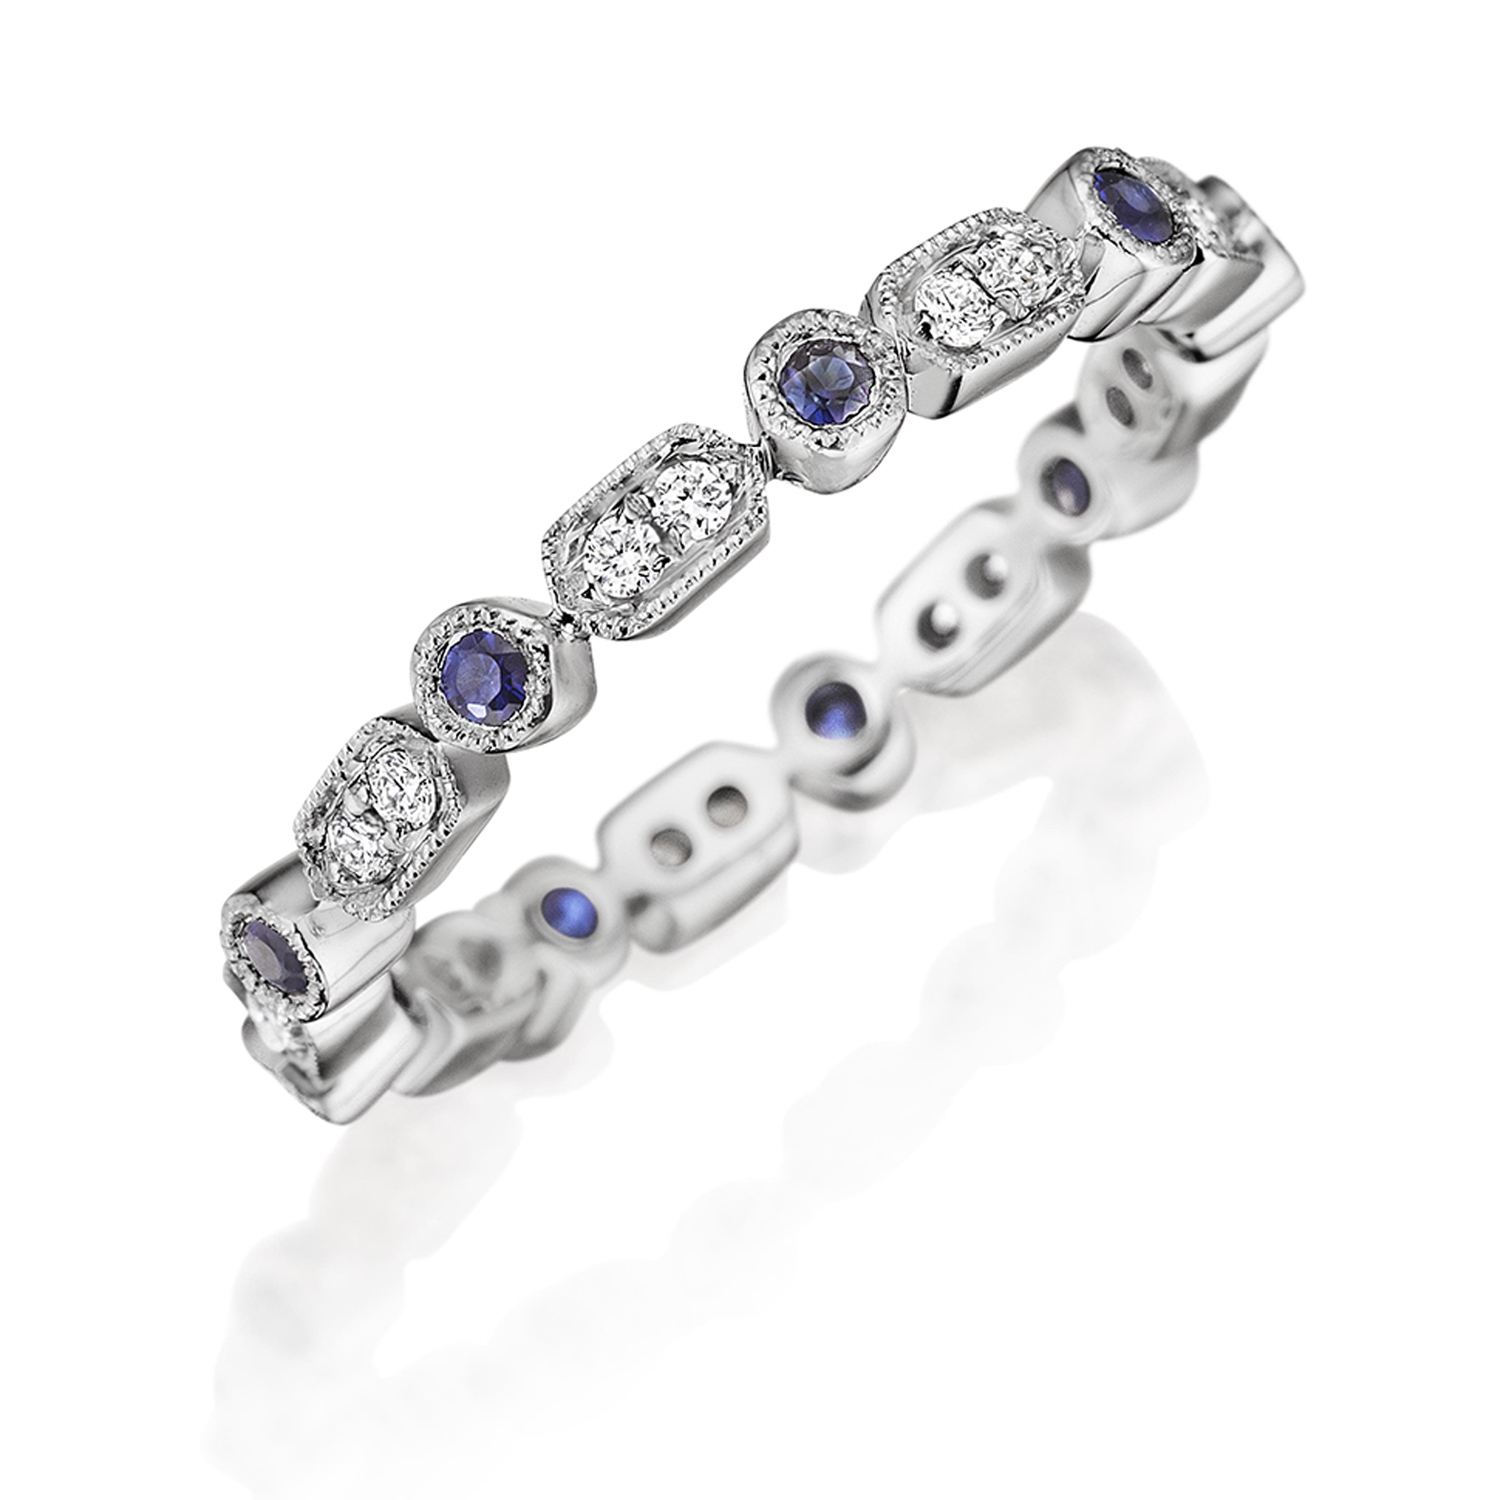 Henri Daussi R43-6 Bead and Bezel Set Diamond and Sapphire Band with Miligrain Detail Alternative View 2